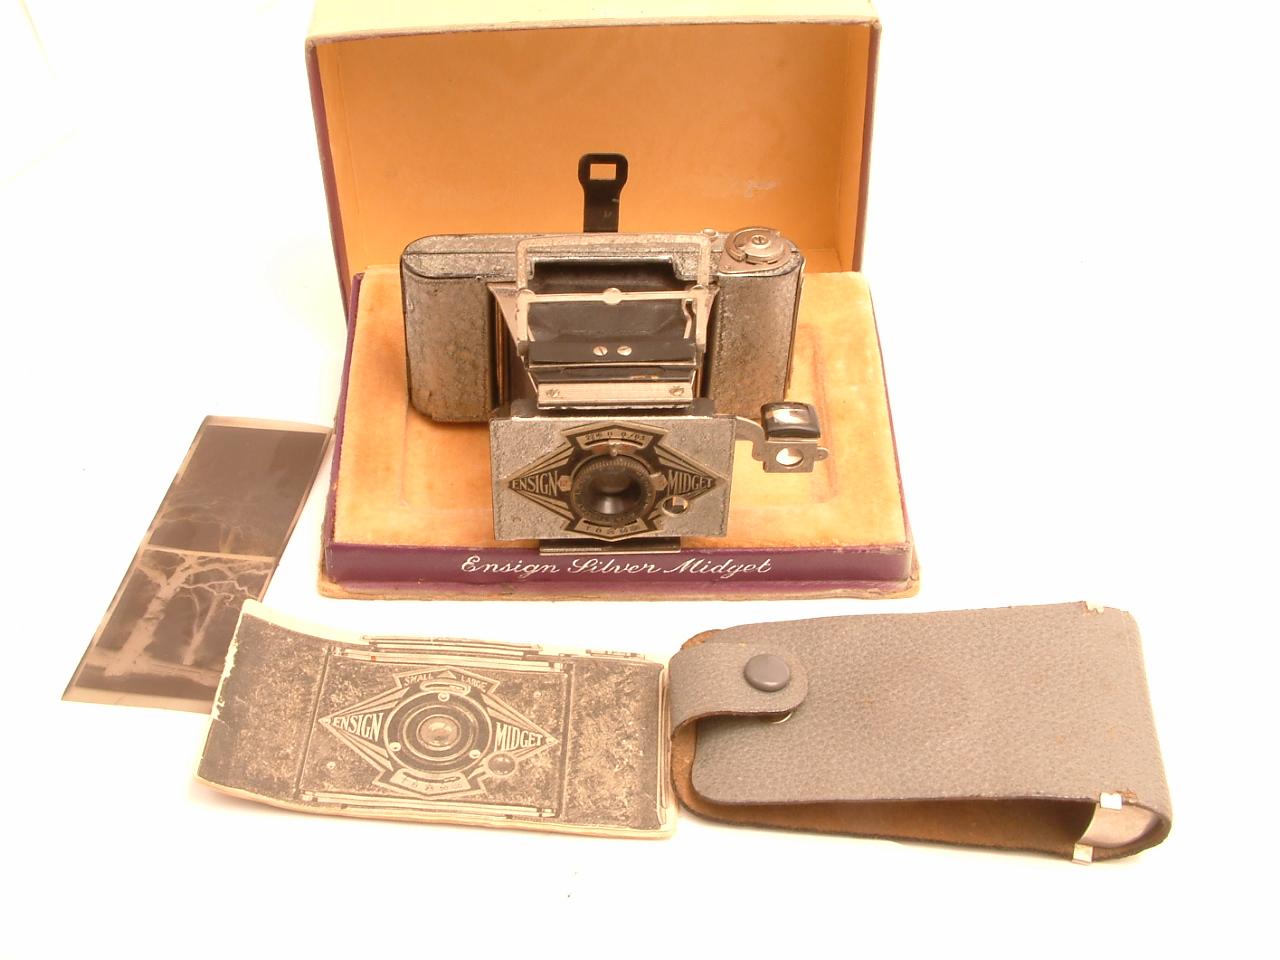 Subminiature, Stereo, Vintage & Collectors Cameras